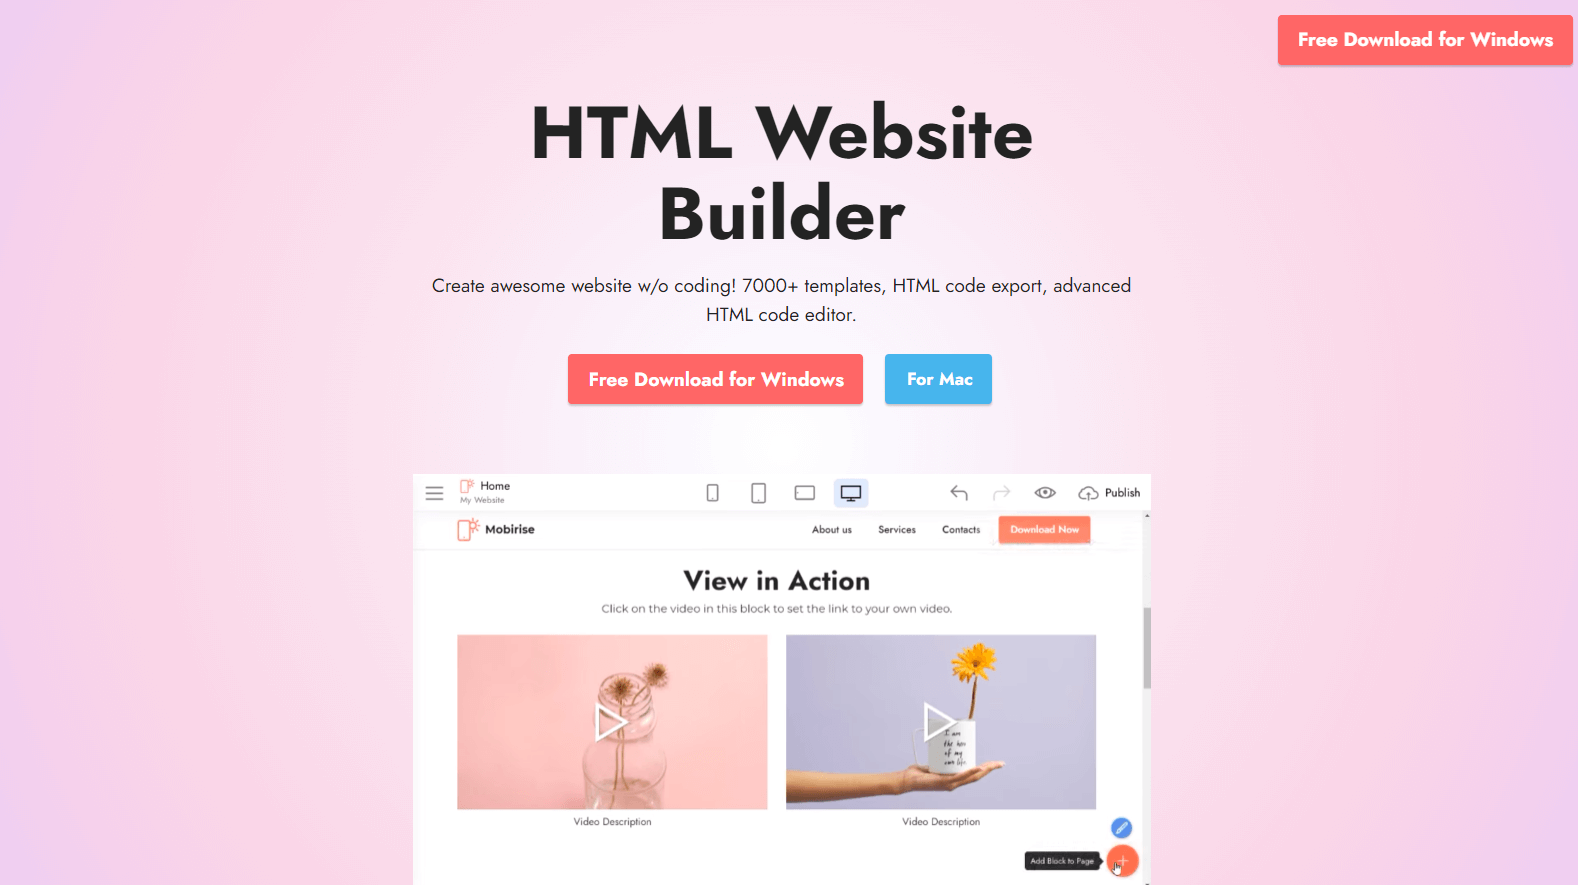  Drag And Drop HTML Builder